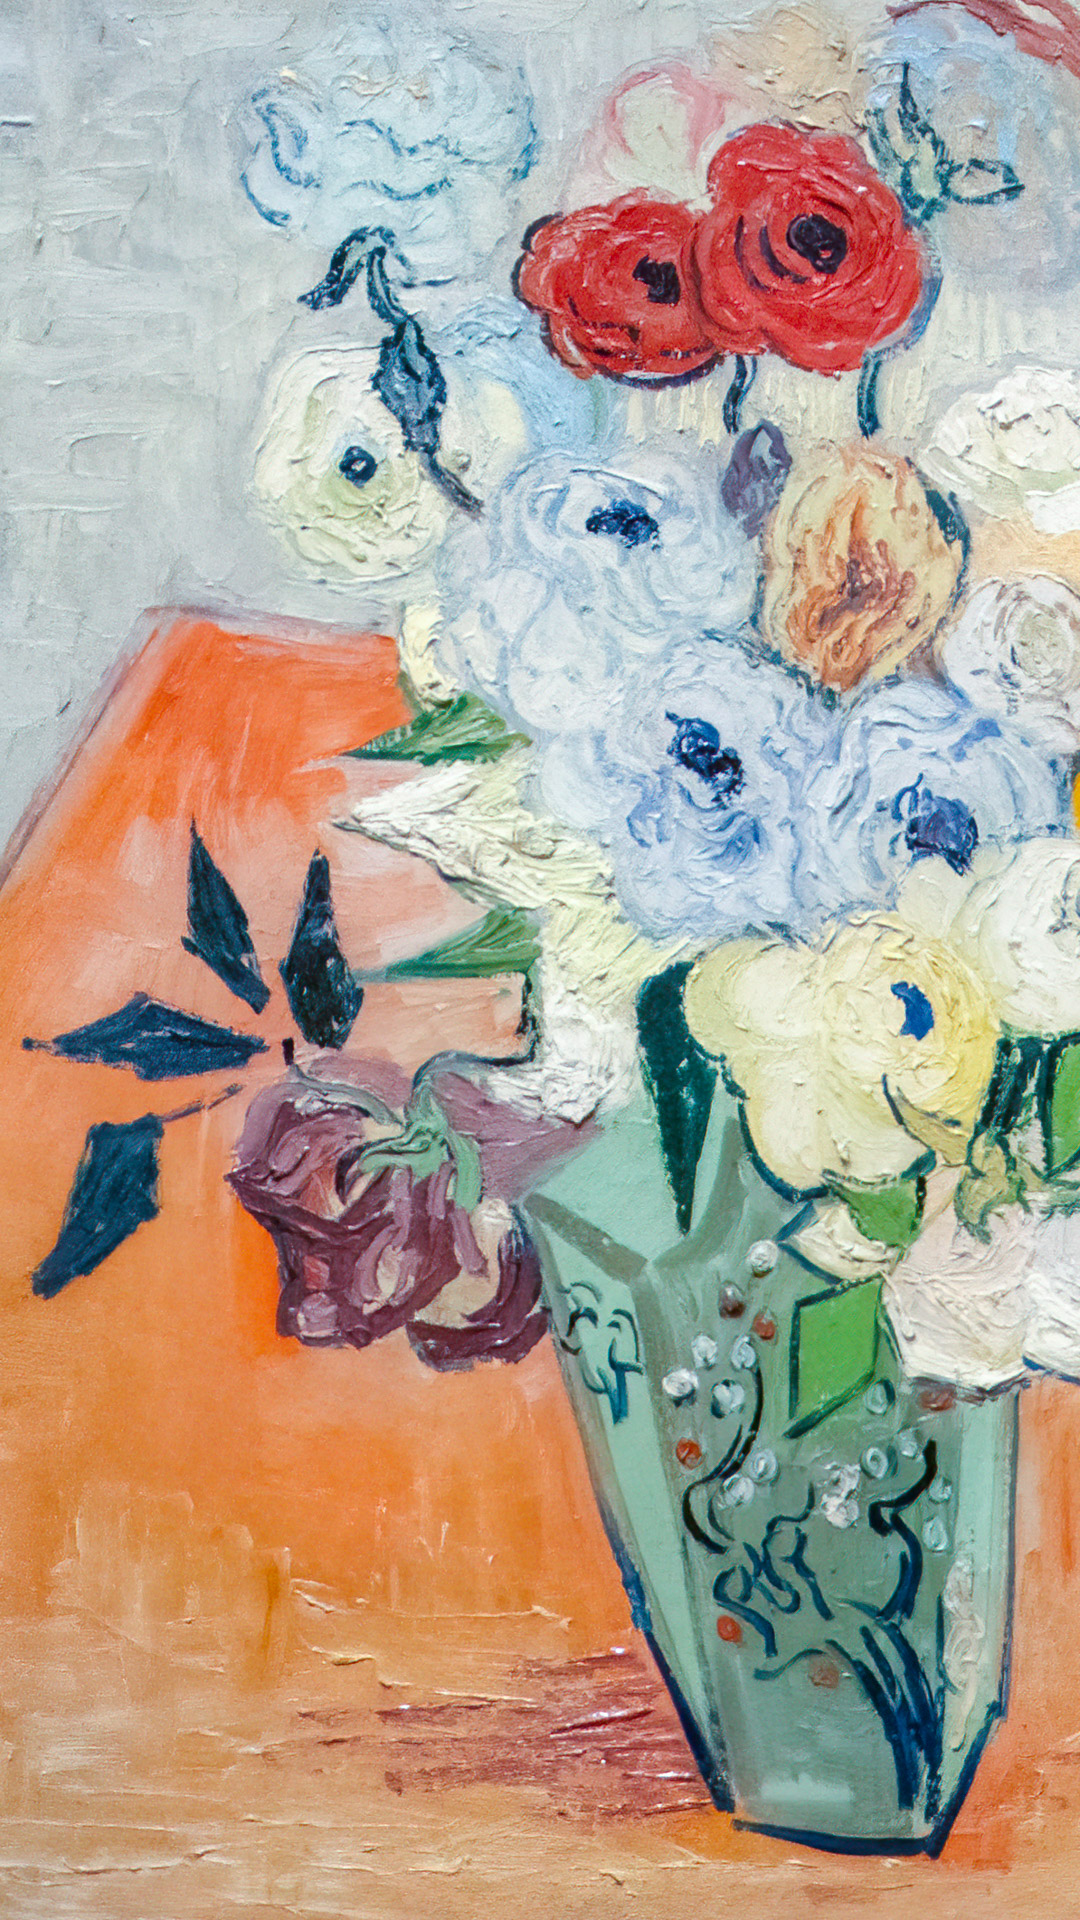 Breathe life into your iPhone with the vivid colors of Vincent van Gogh's flowers, turning your device into a botanical work of art.